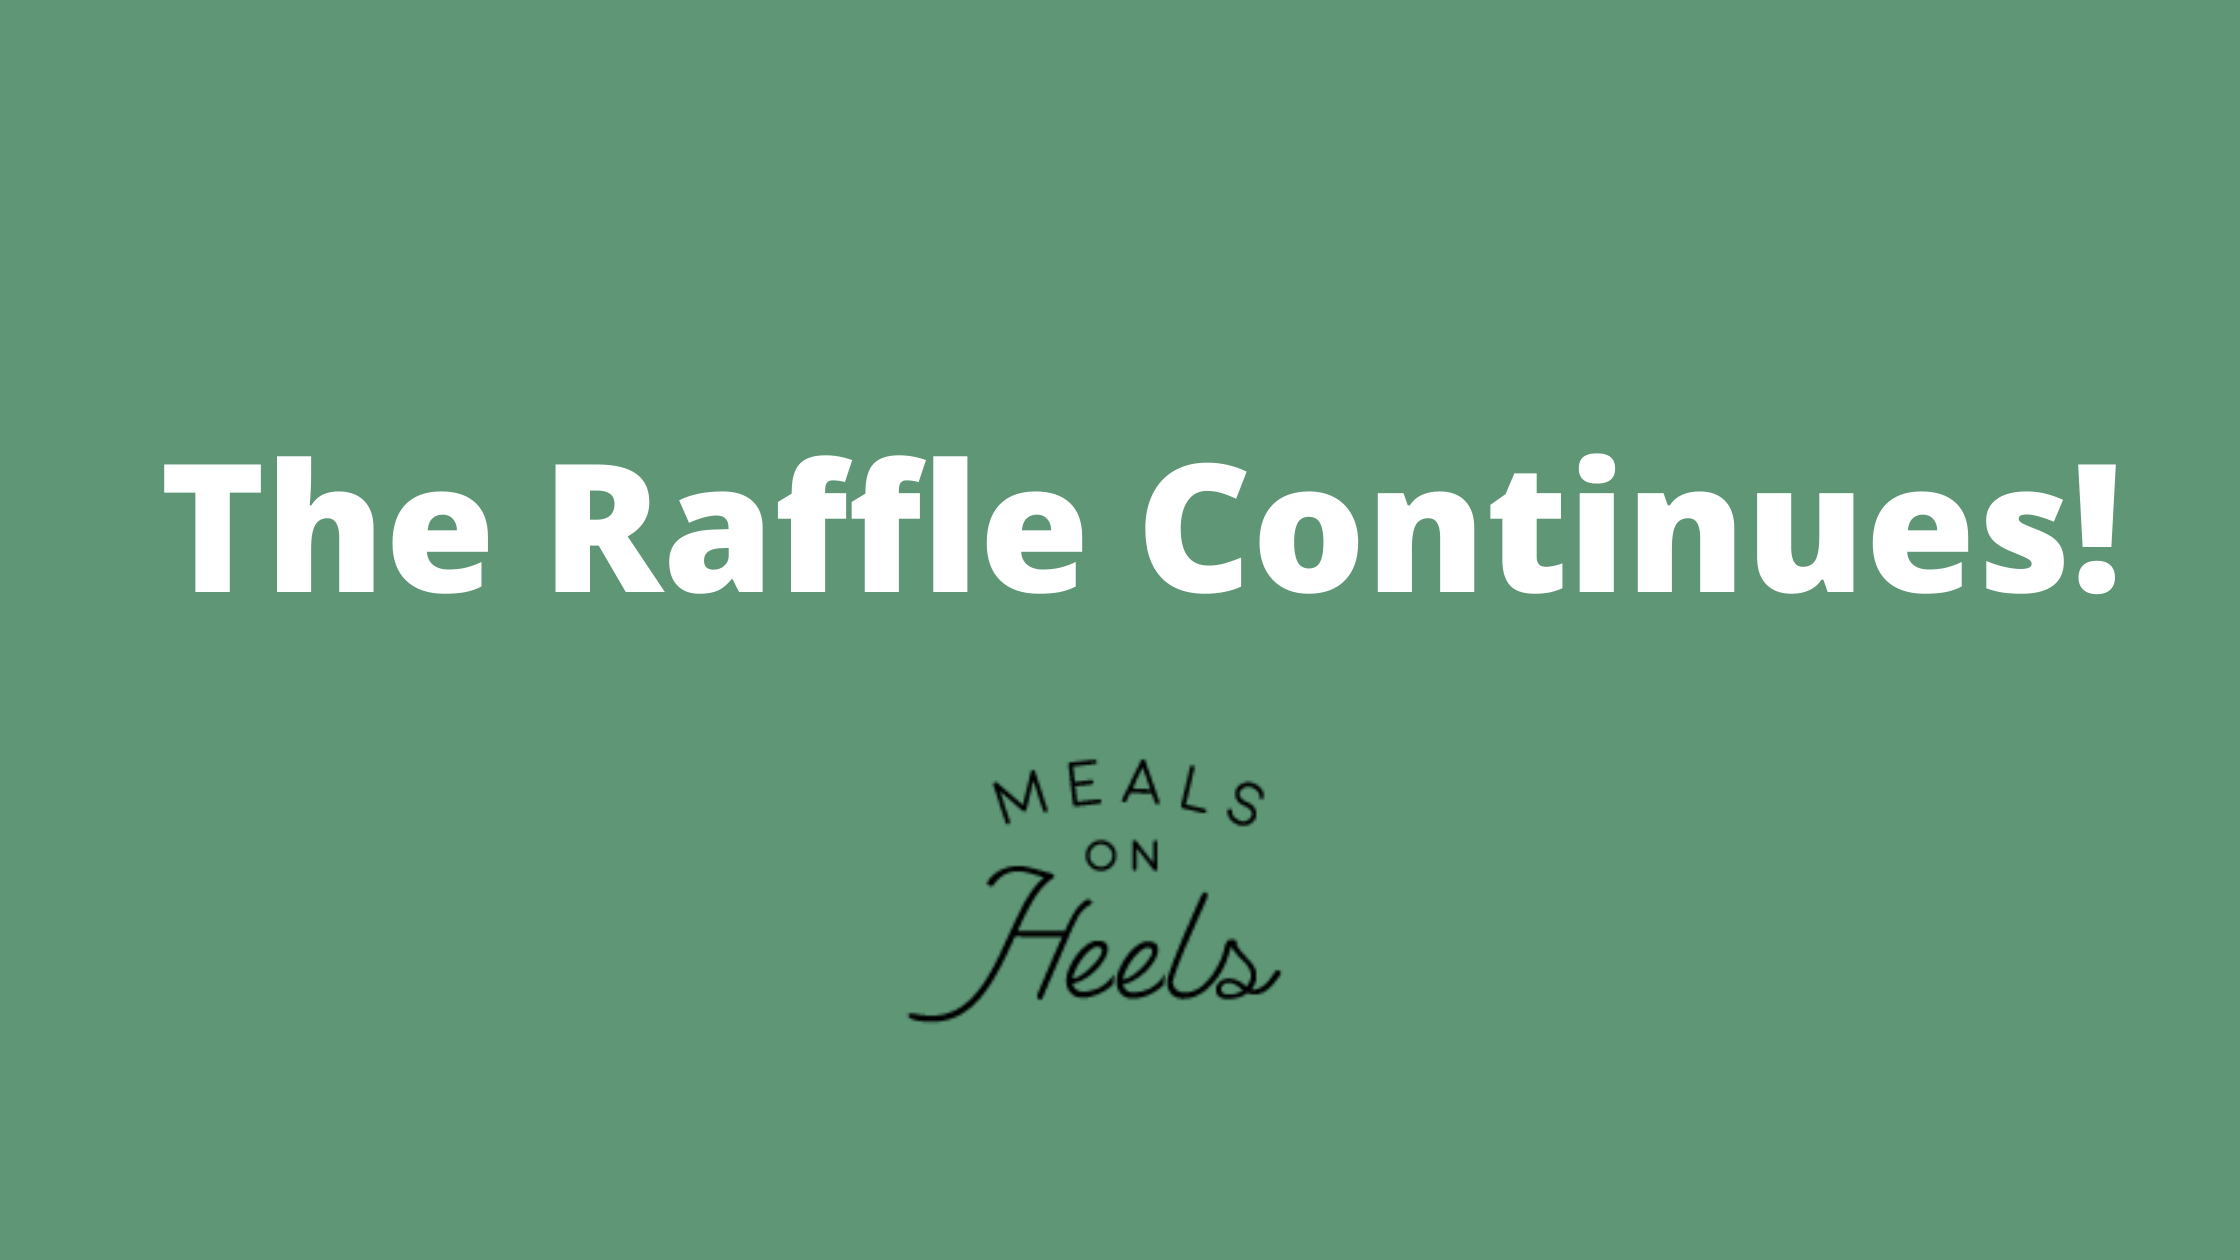 The Raffle Continues! Meals on Heels